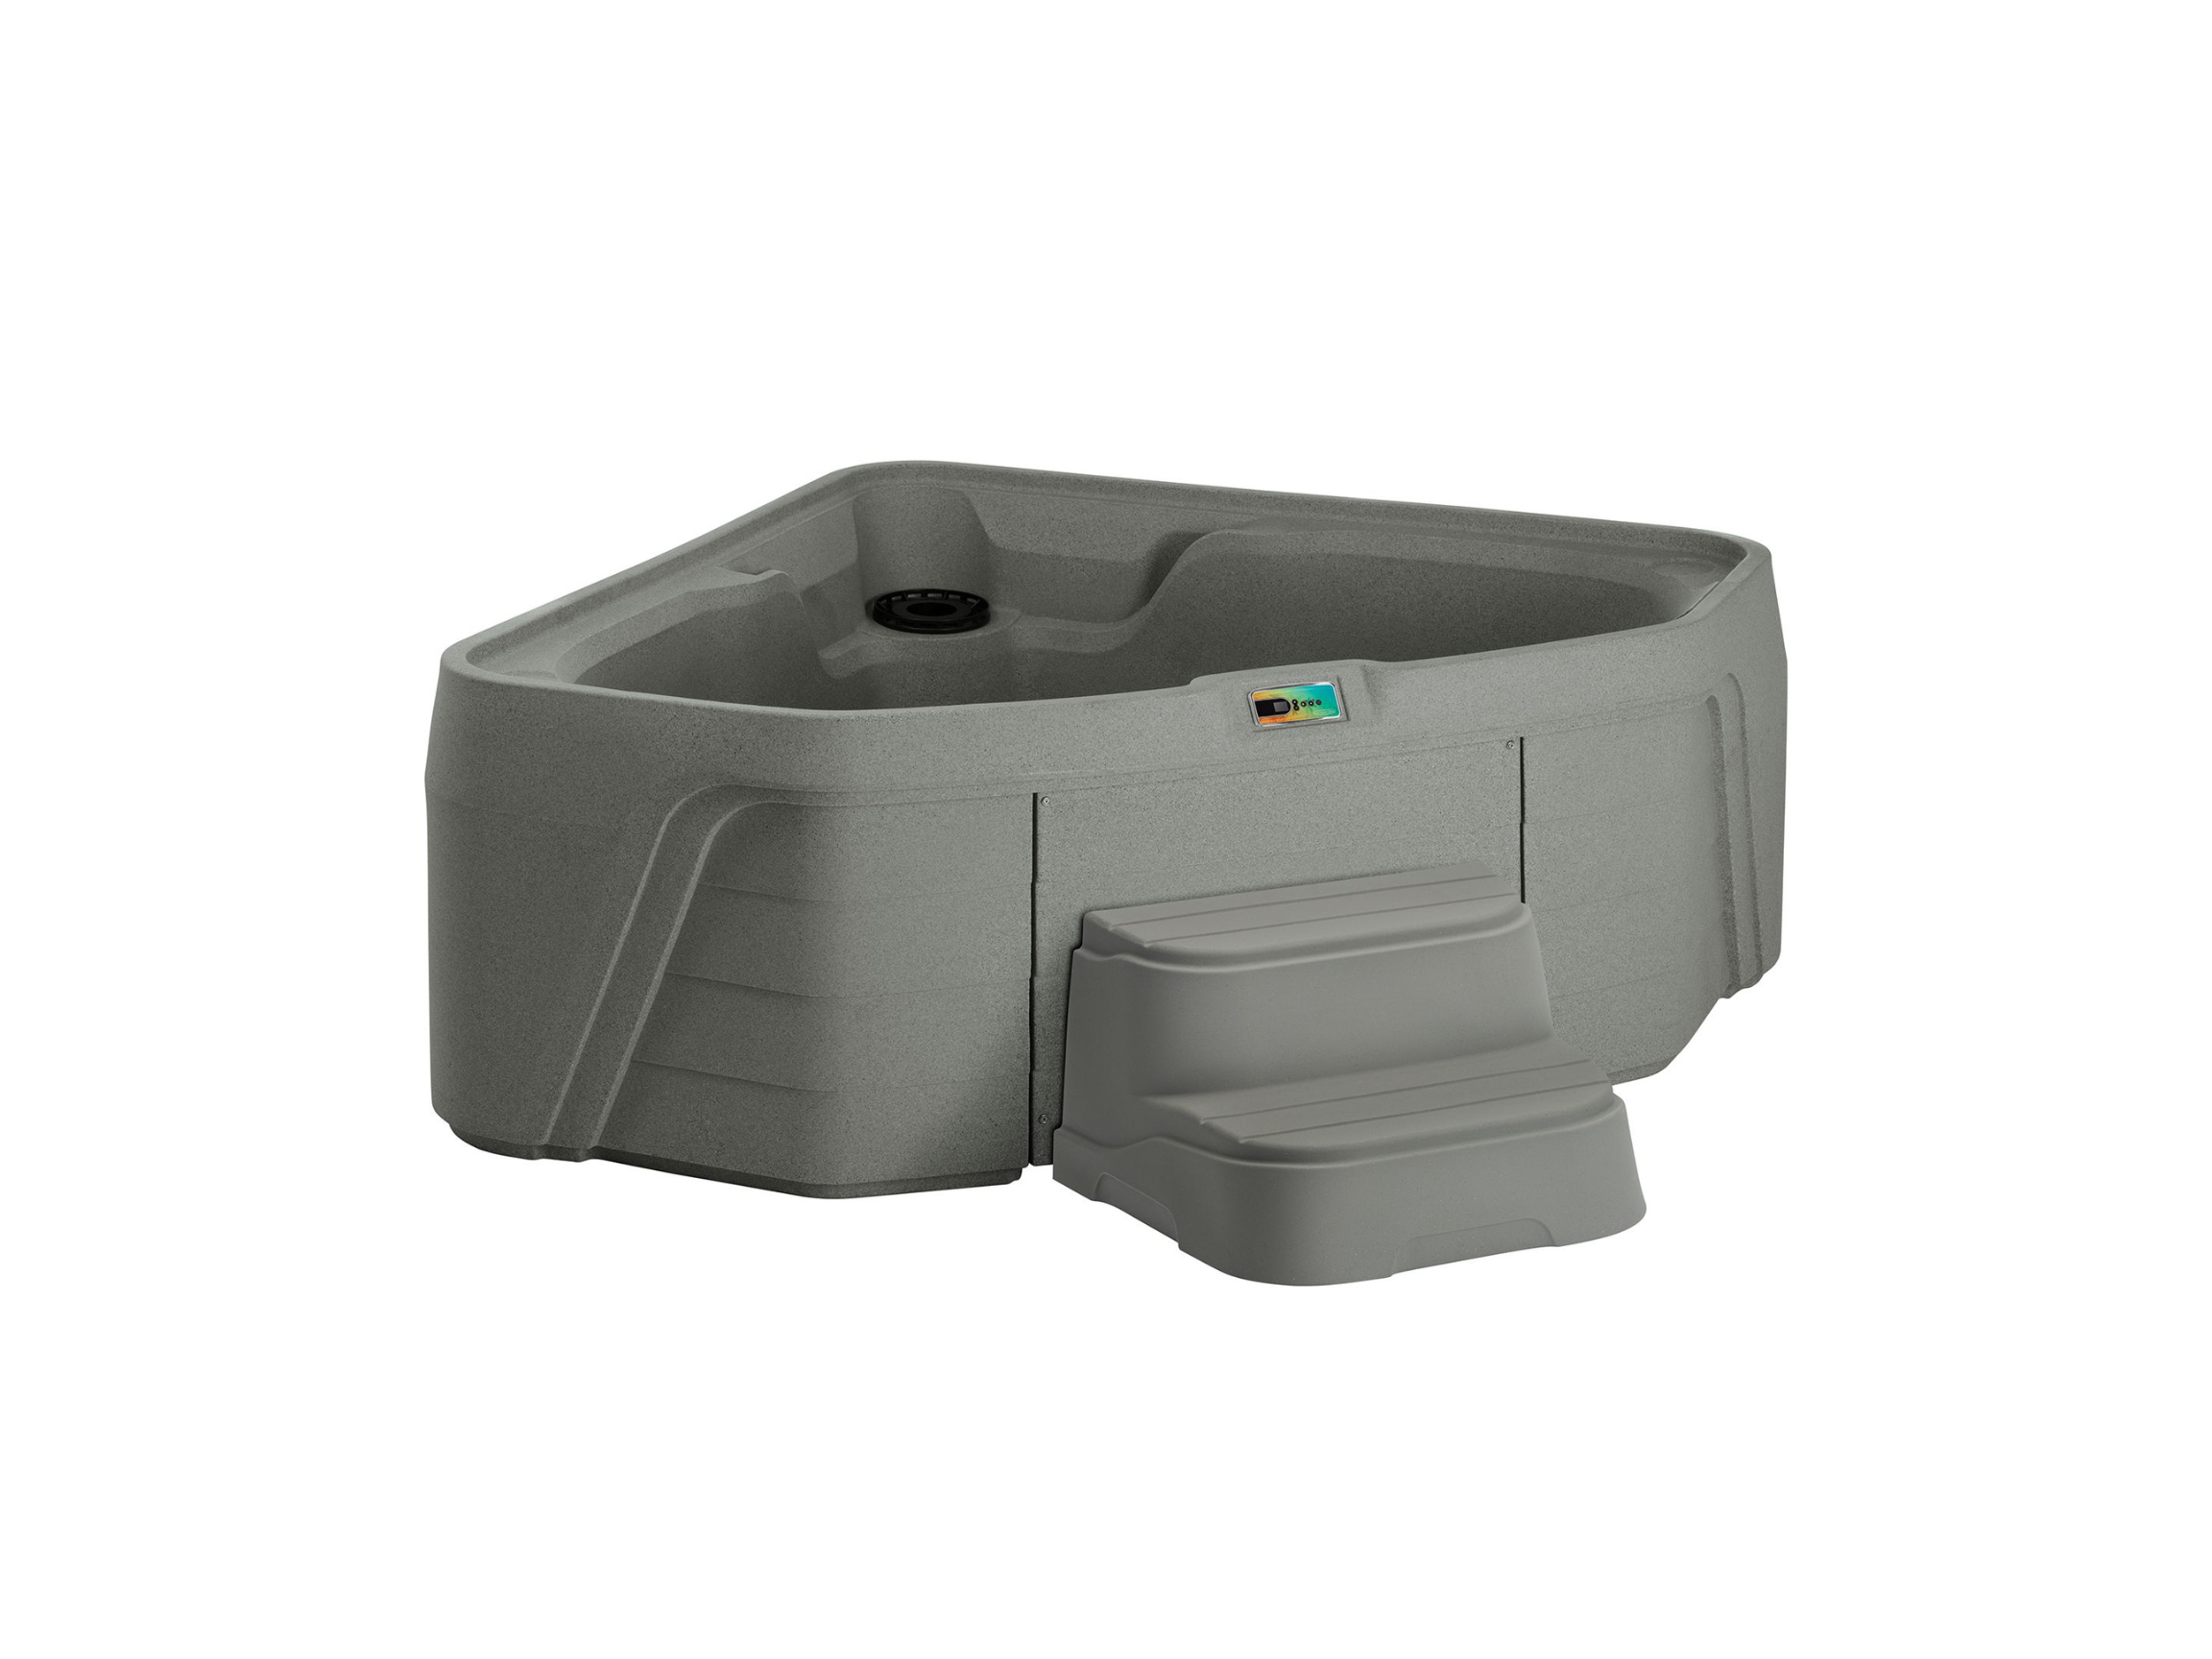 fantasy embrace hot tub in taupe color 2 person plug n play model in stock